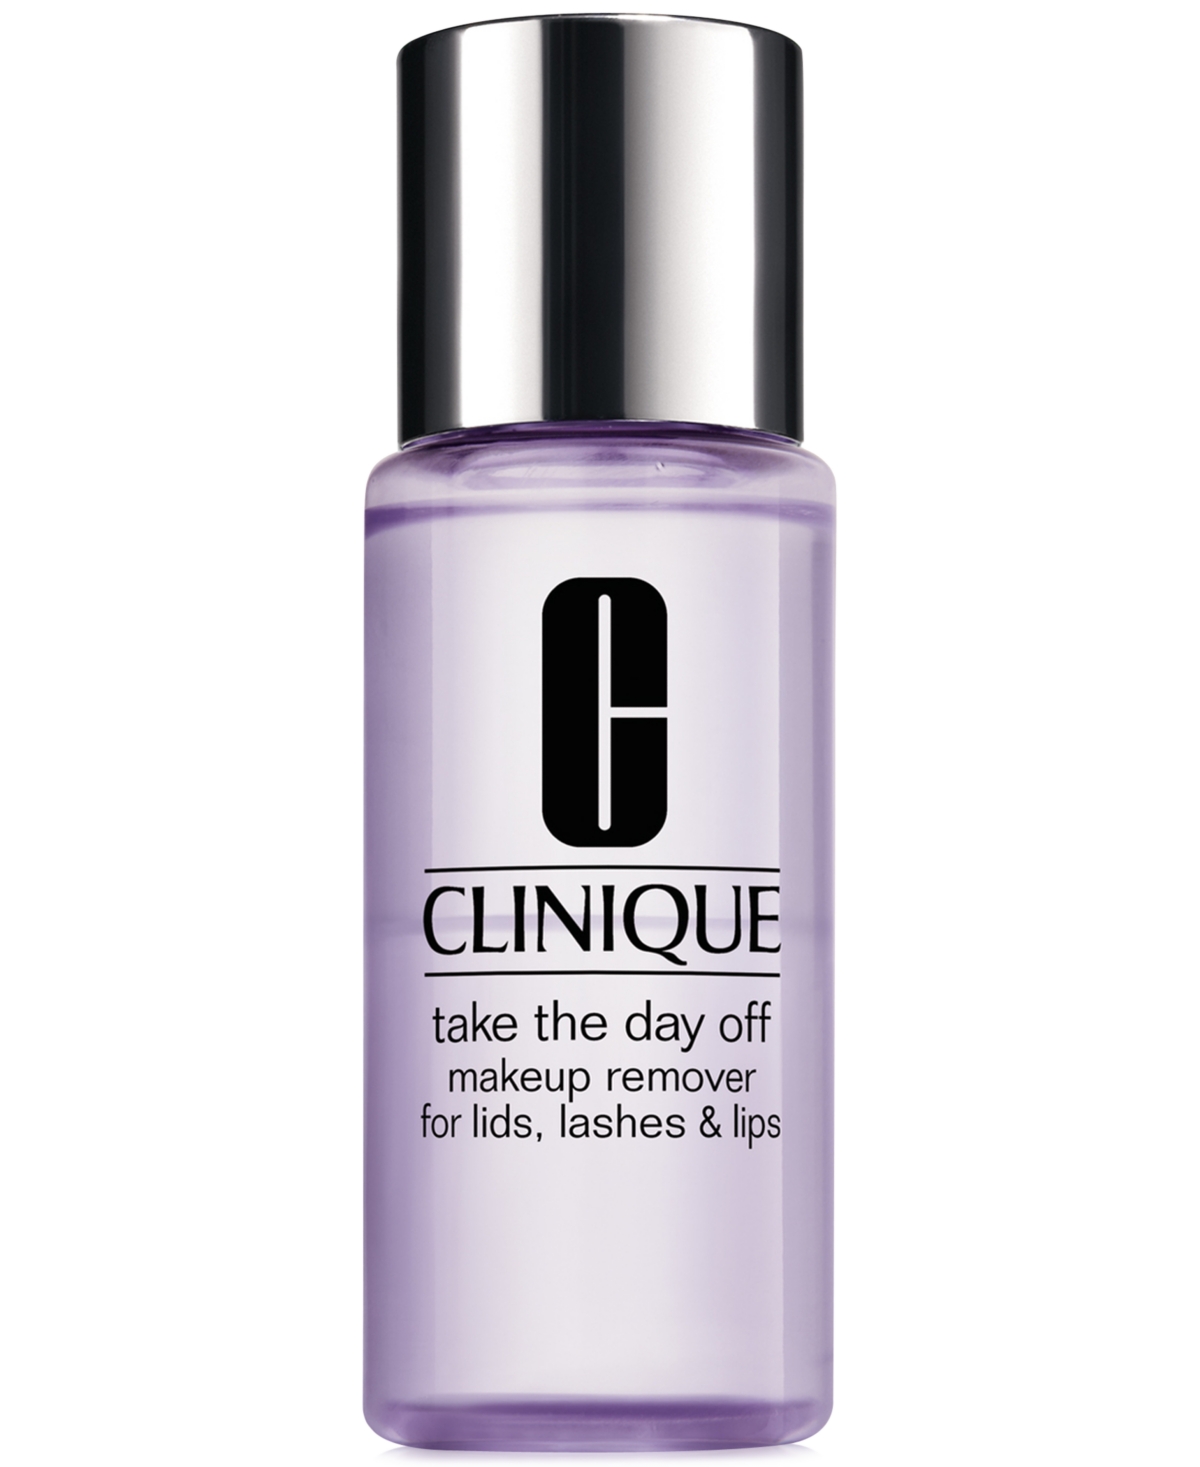 Mini Take The Day Off Makeup Remover For Lids, Lashes & Lips, 1.7 oz.